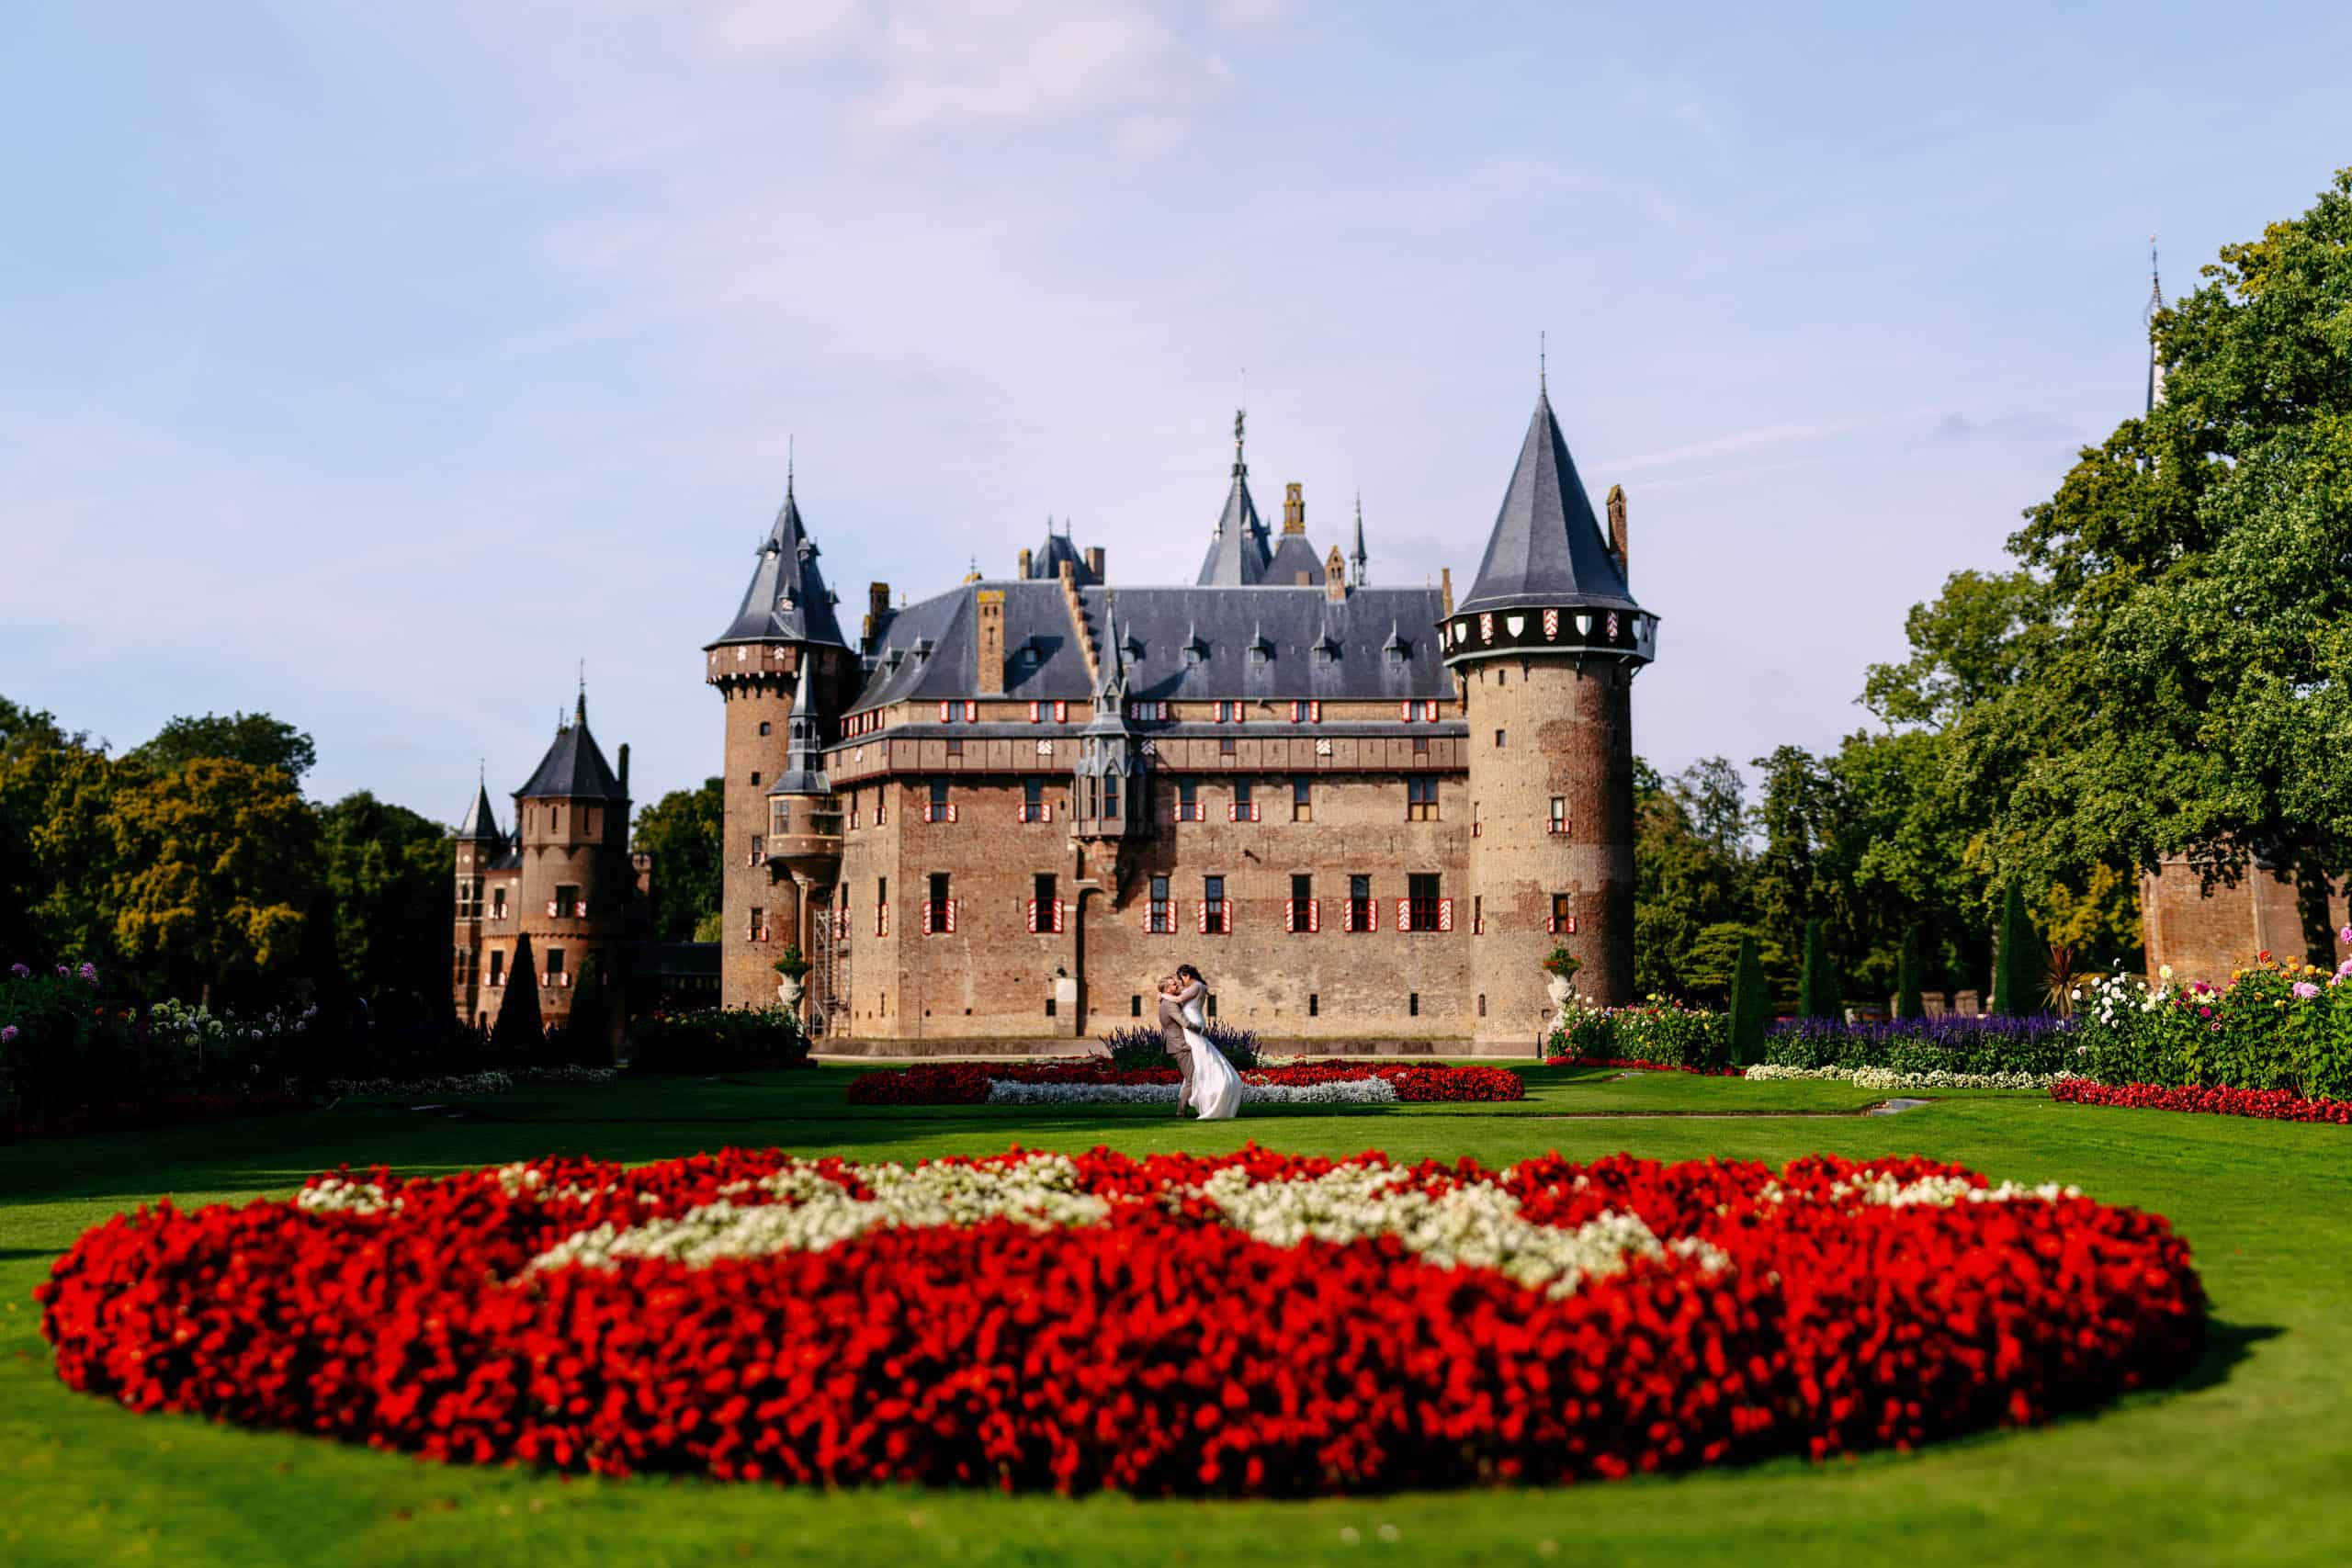 A bride and groom stand in front of a castle, chosen as one of South Holland's most picturesque wedding venues.